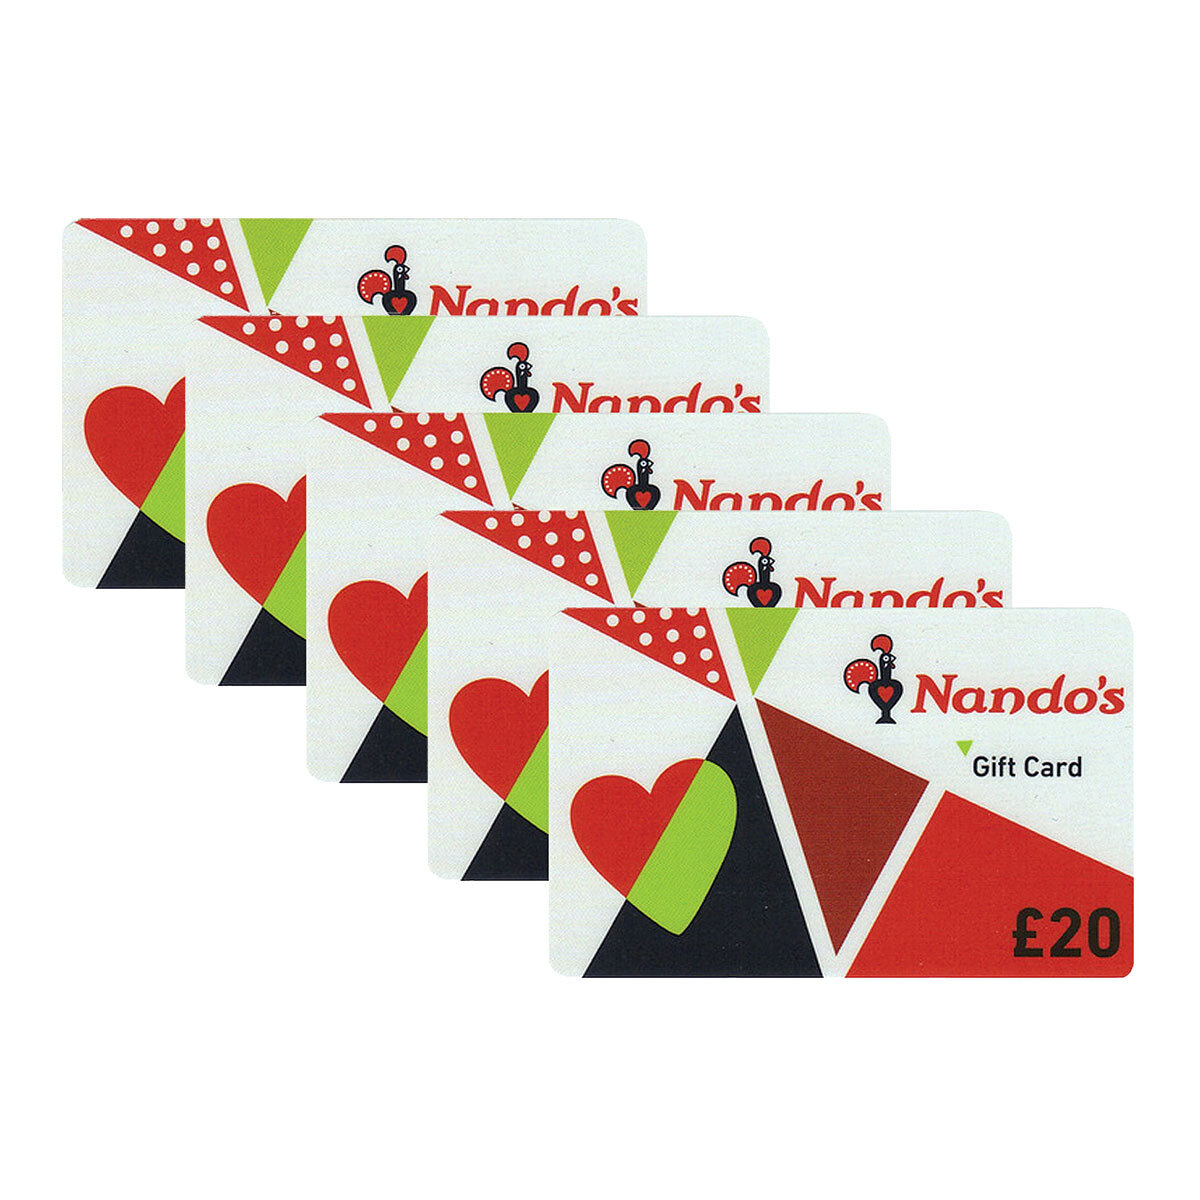 Nando's Gift Cards Multipack, 5 x £20